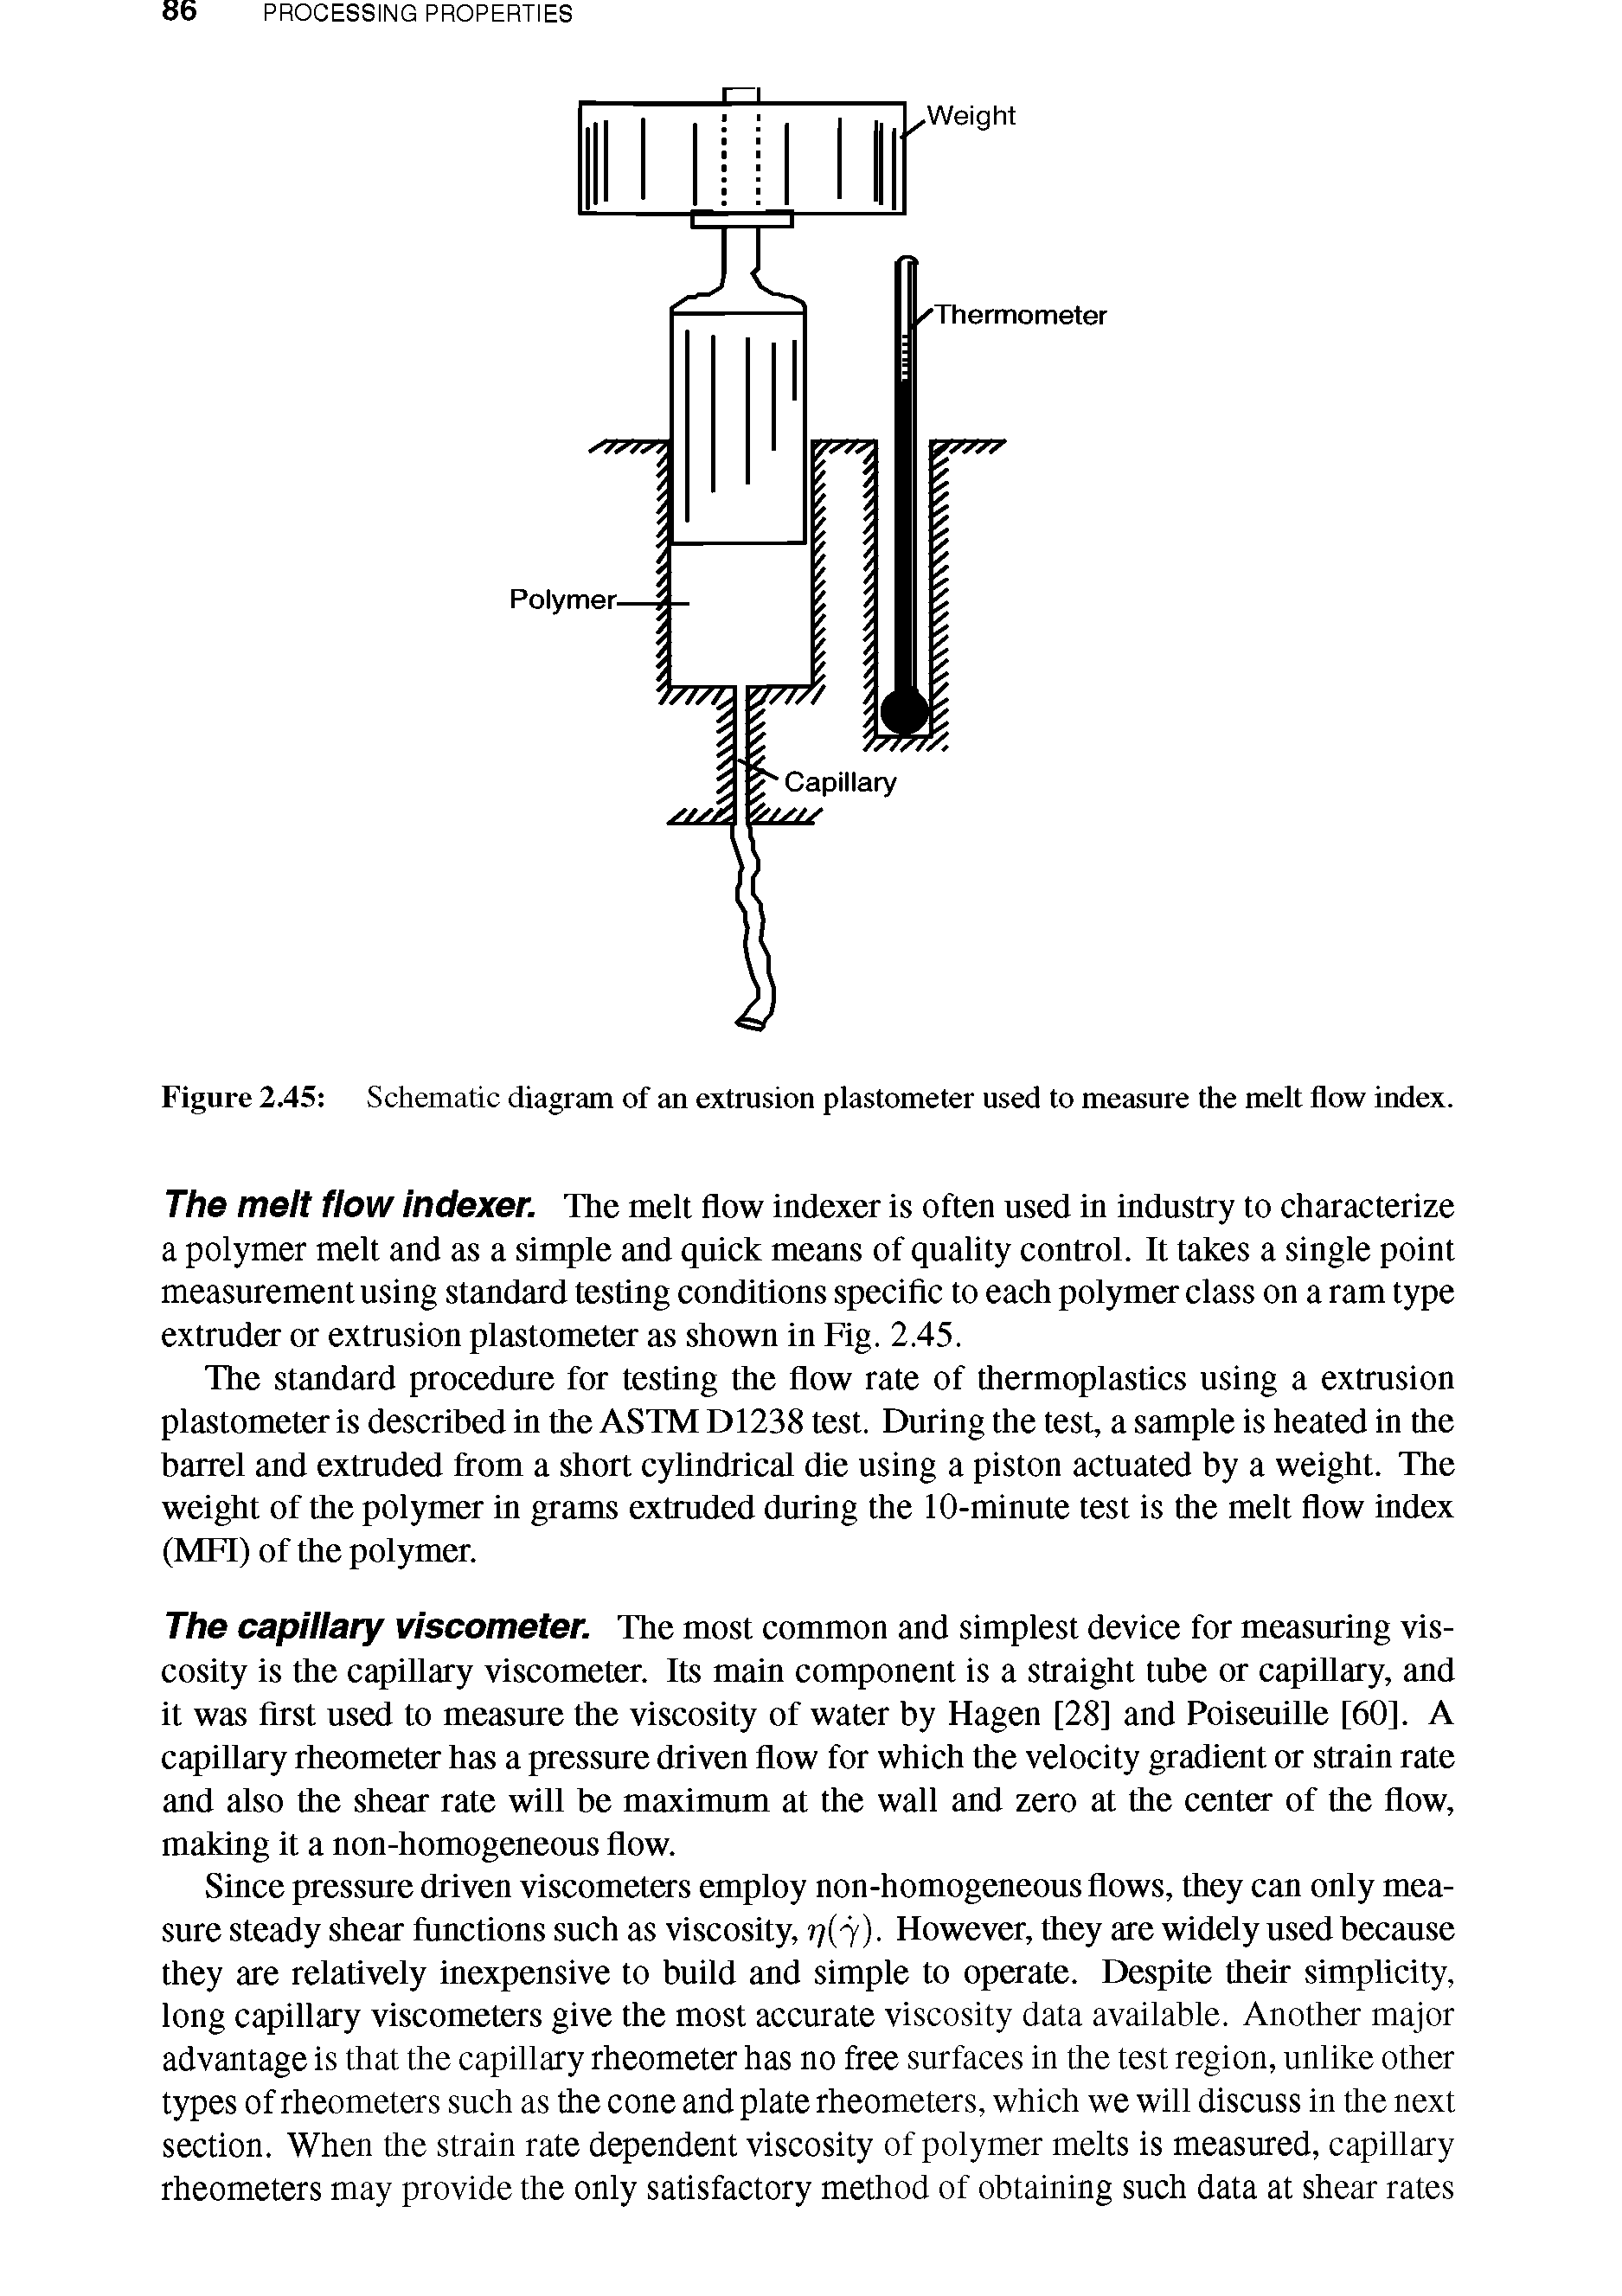 Figure 2.45 Schematic diagram of an extrusion plastometer used to measure the melt flow index.